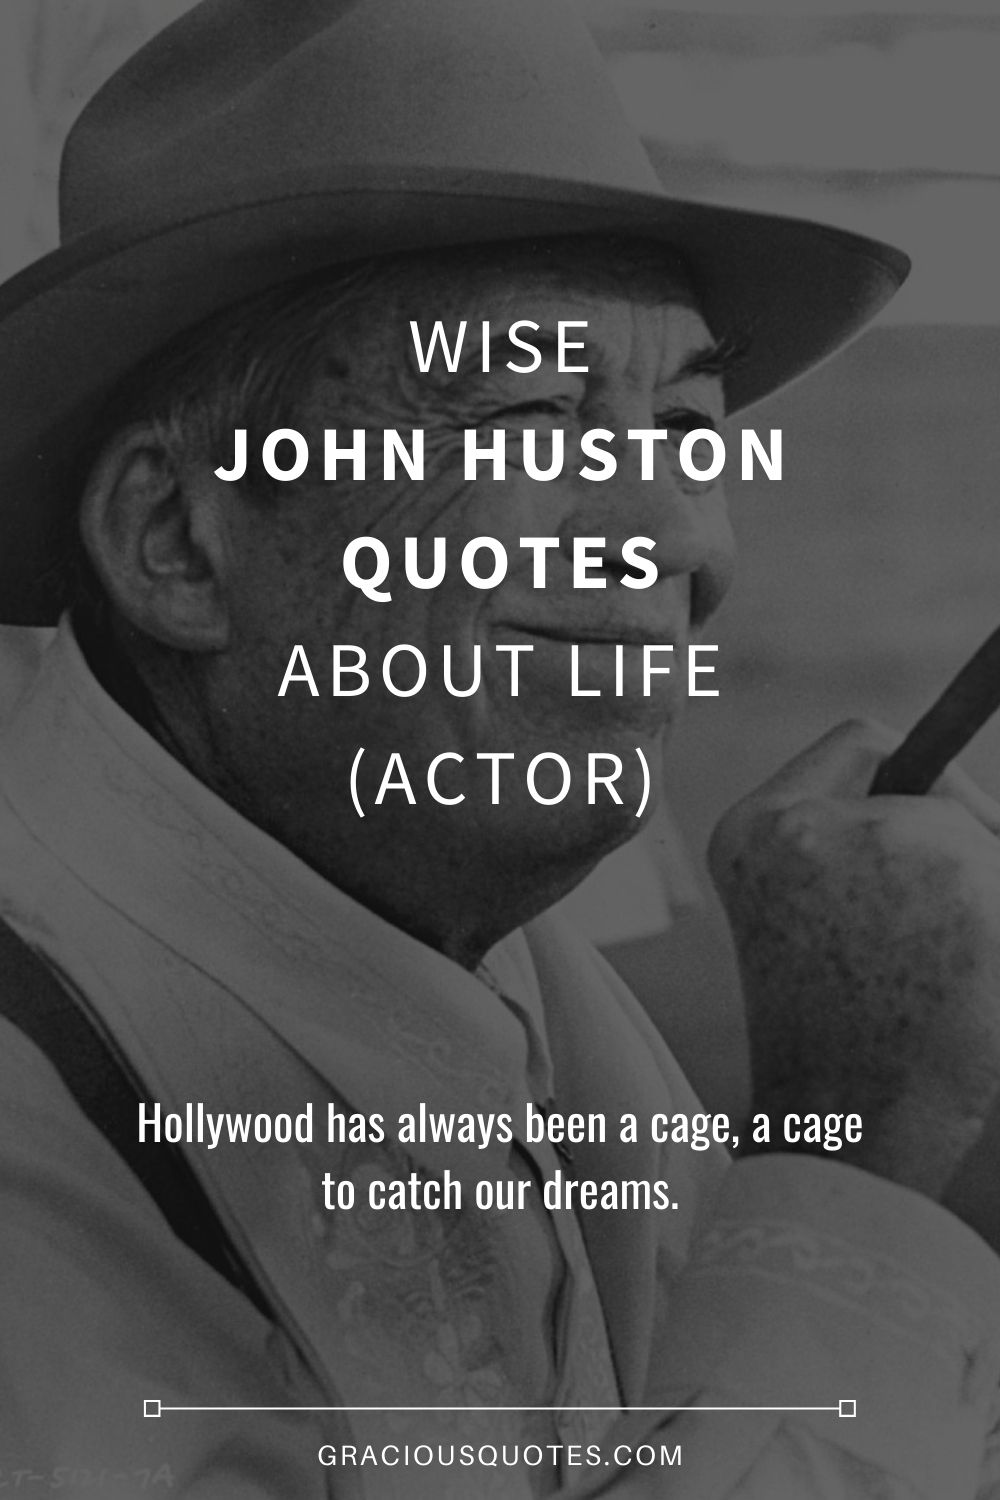 Wise John Huston Quotes About Life (ACTOR) - Gracious Quotes